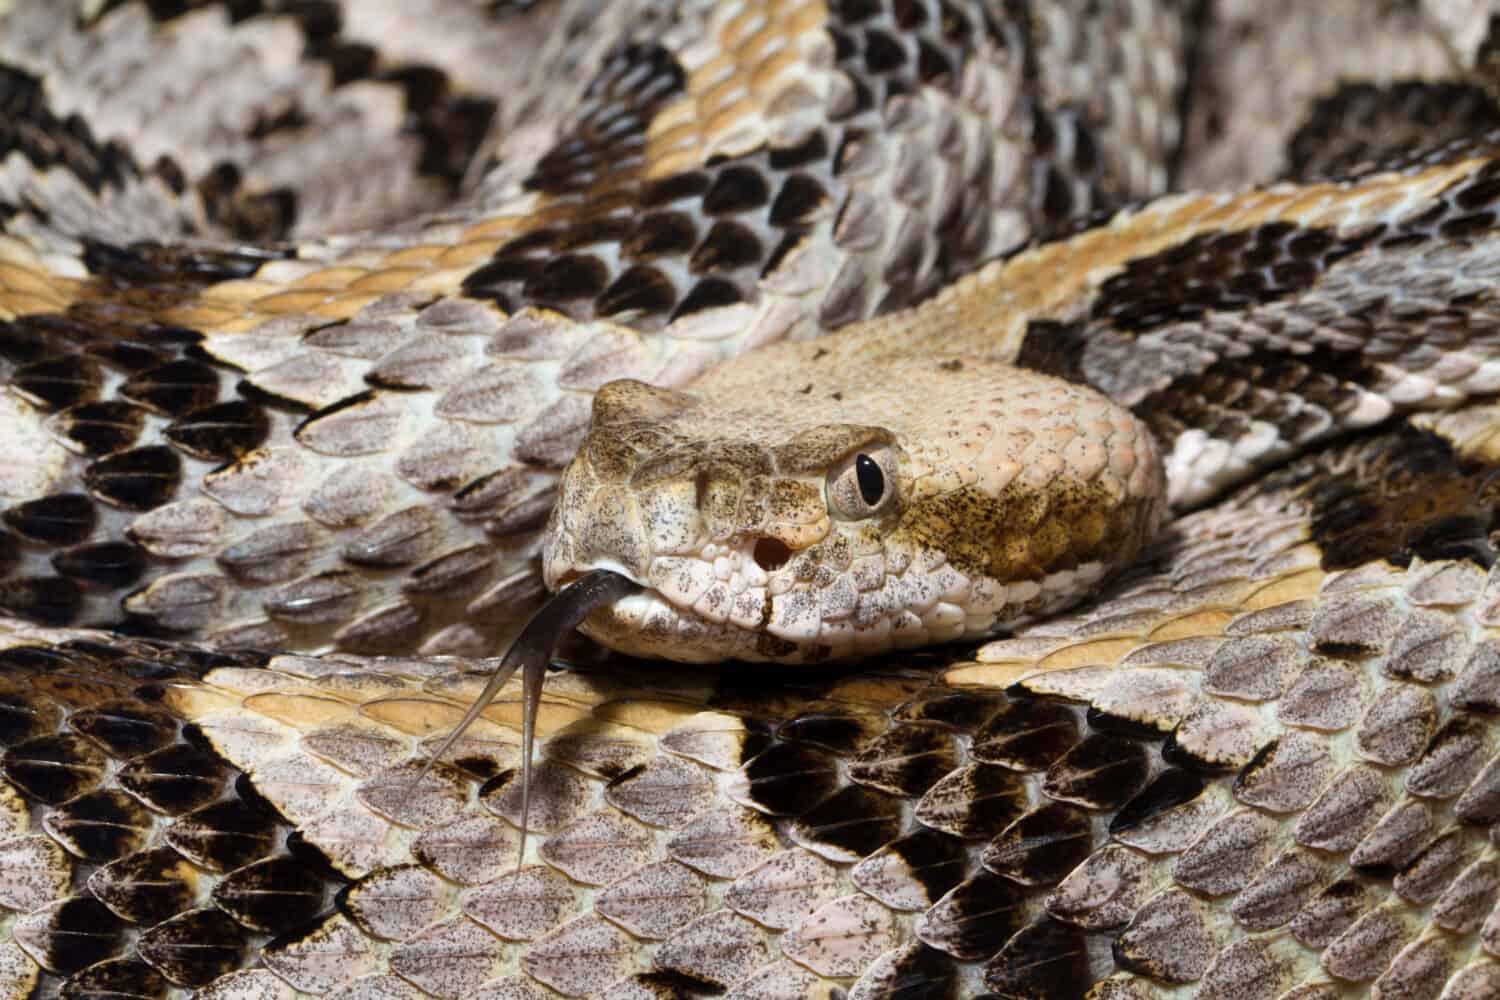 Venomous Timber Rattlesnake (Crotalus horridus) with forked tongue